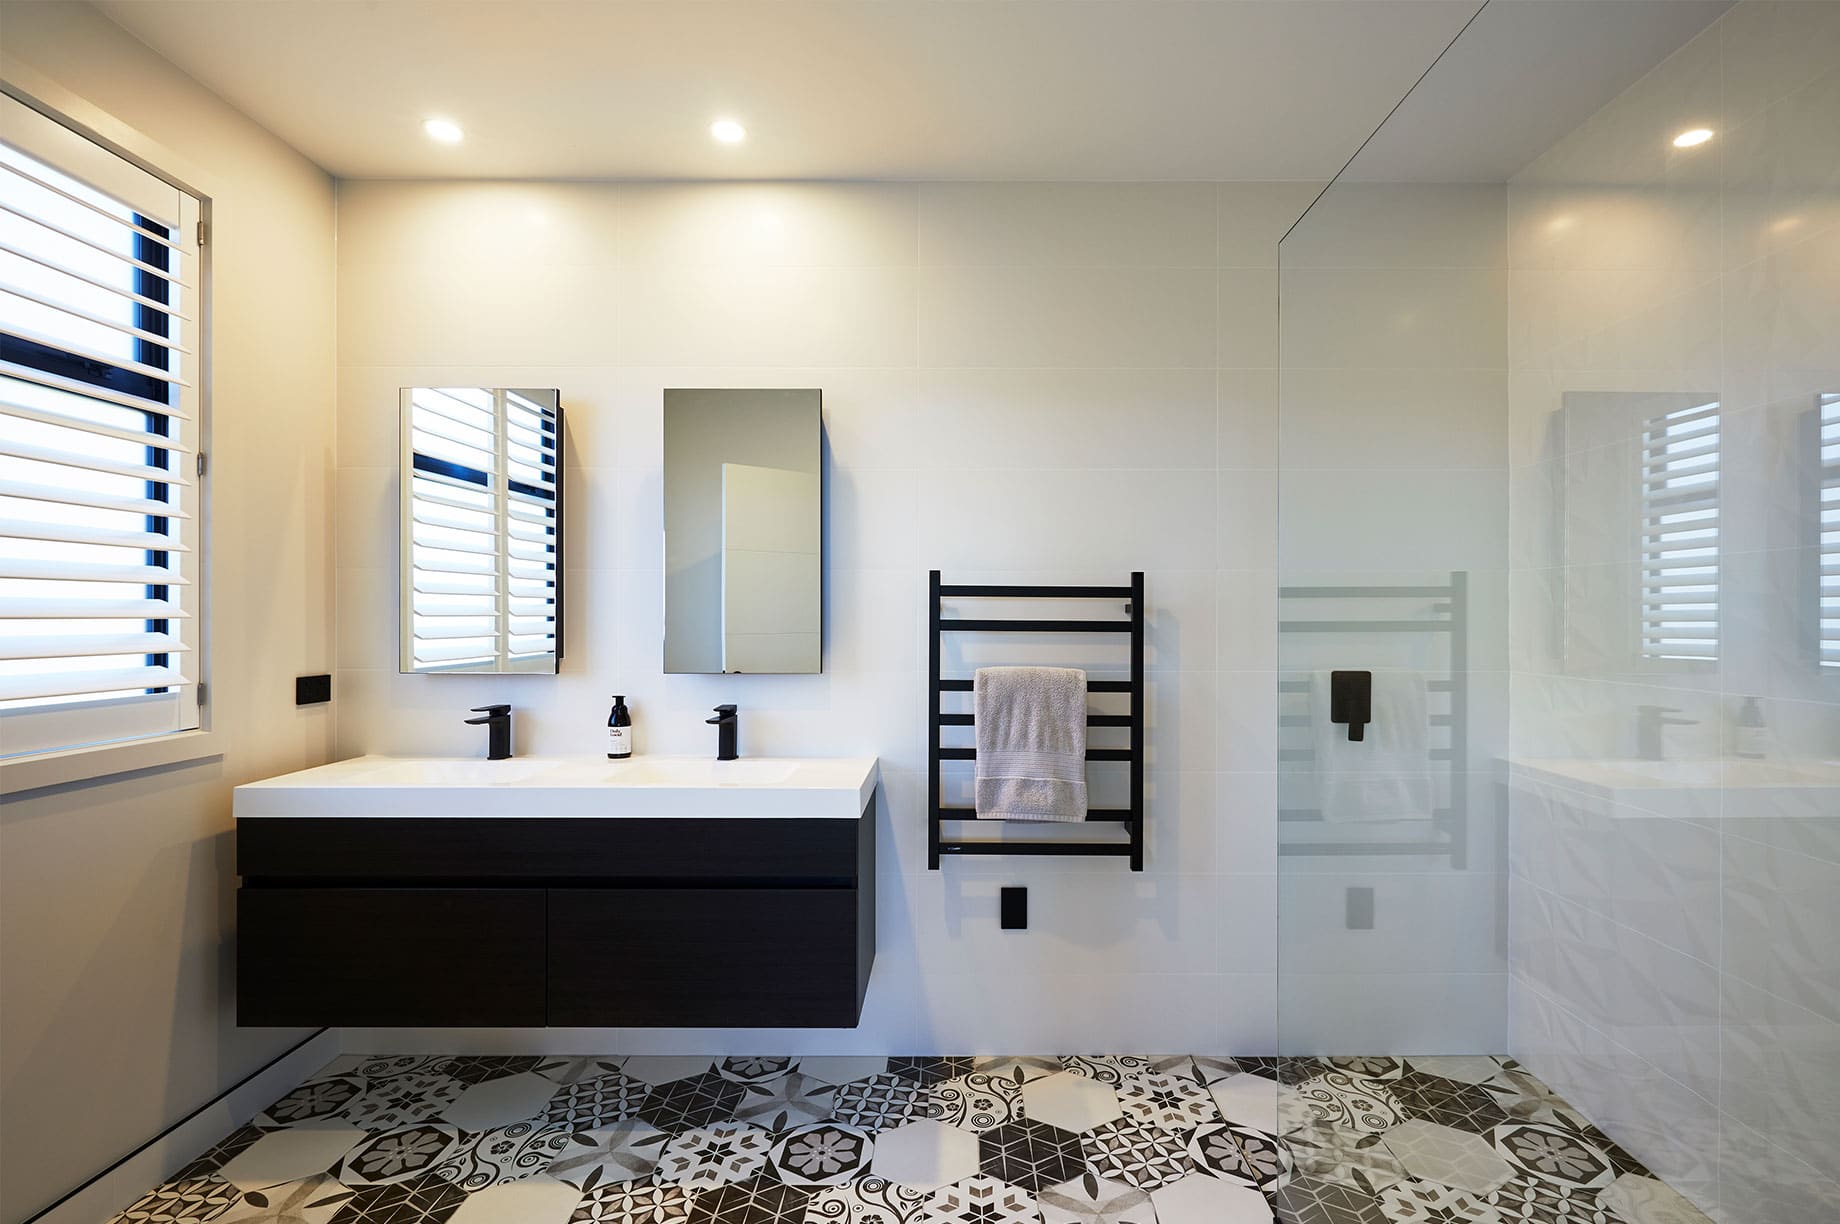 White bathroom interior with black accents